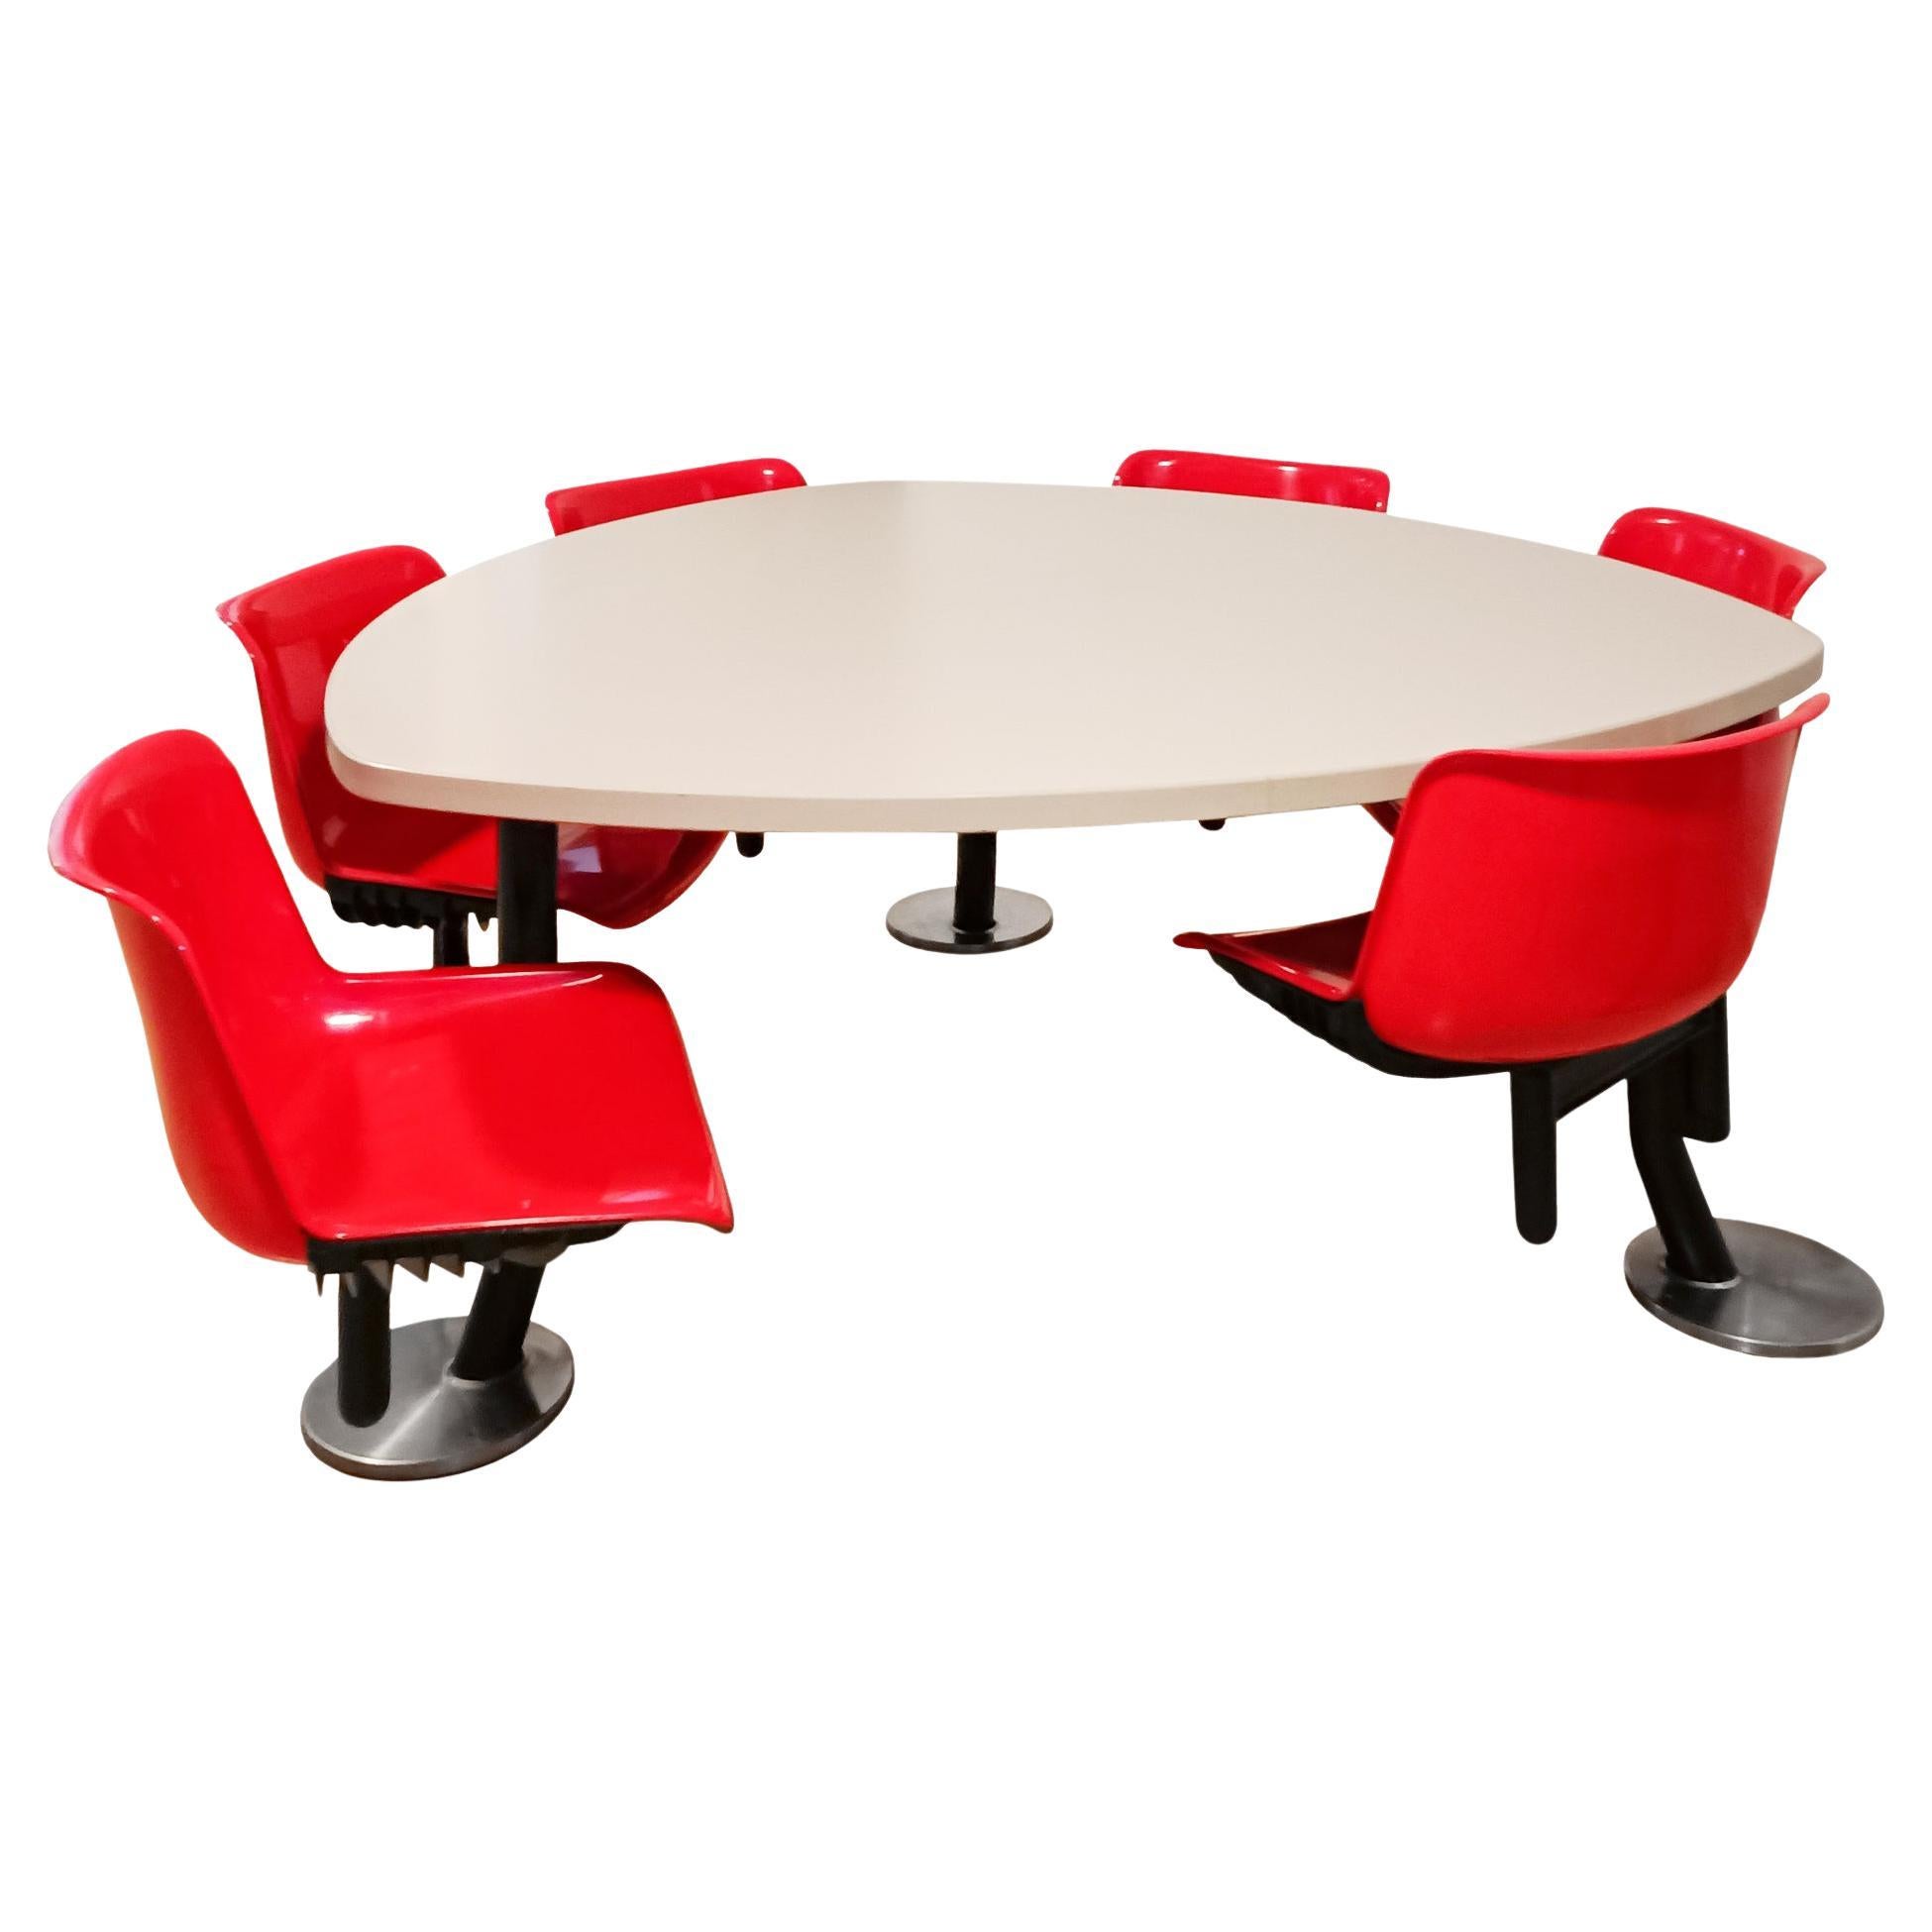 “MODUS” table and chairs by Borsani – Italy 1970